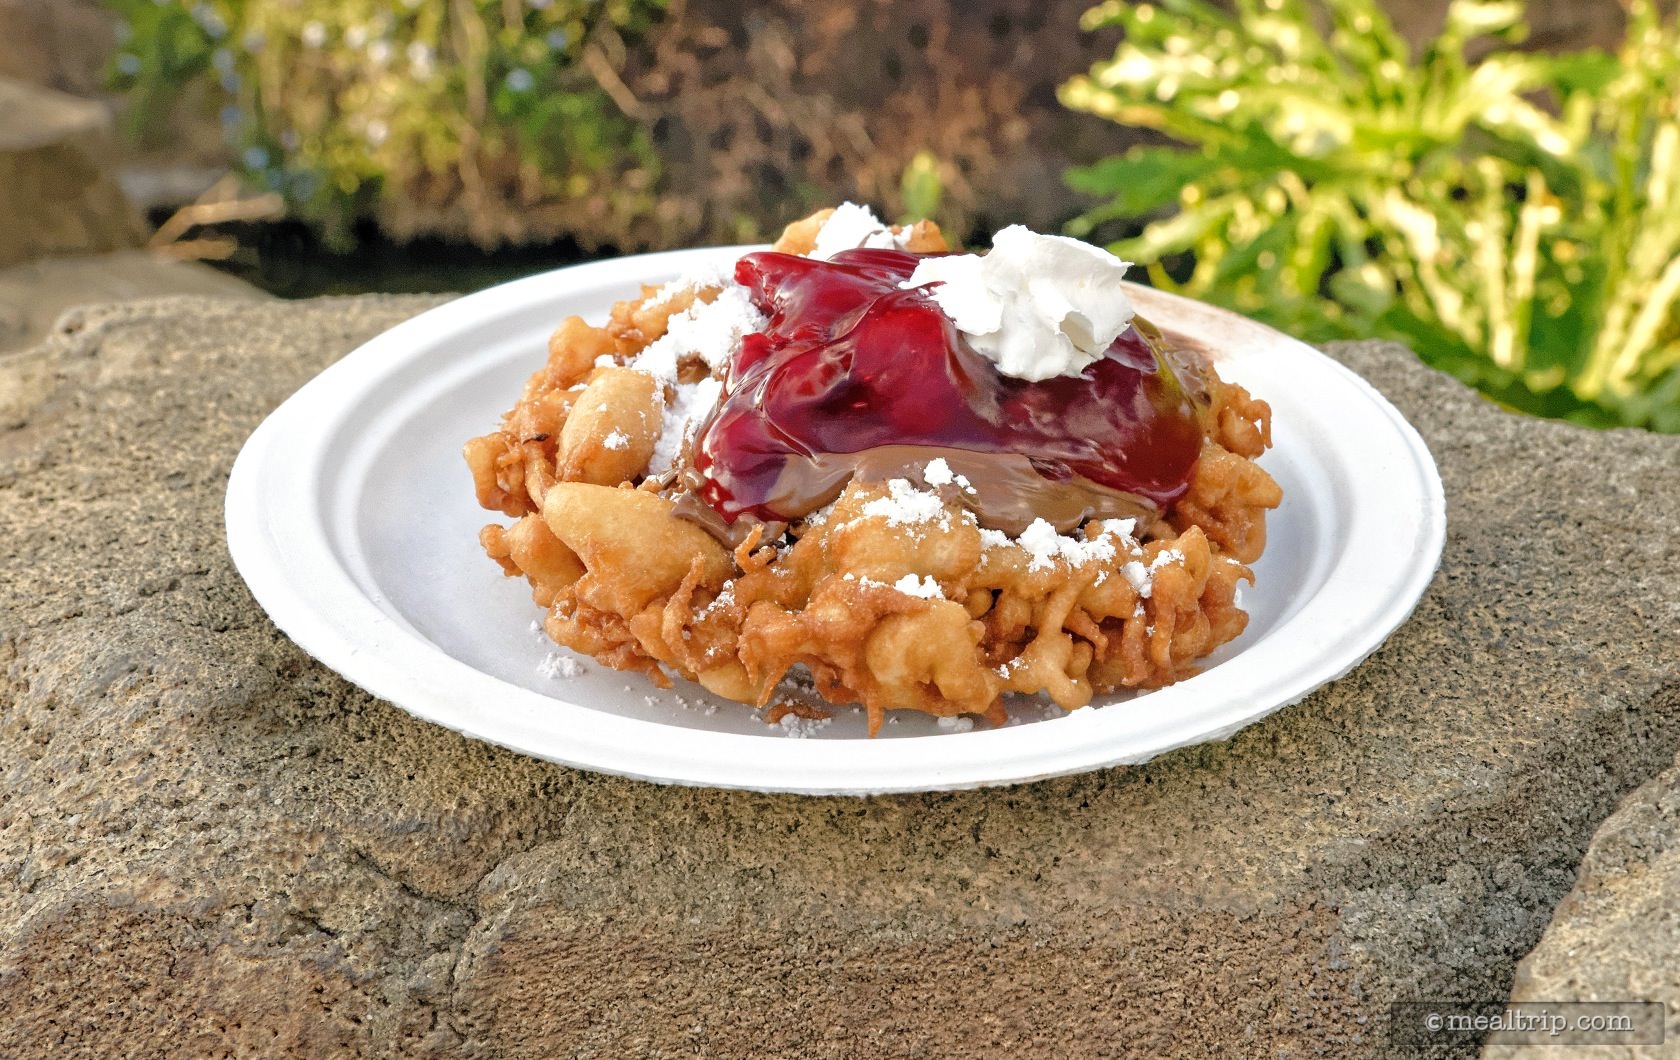 Festival Funnel Cake from the All-American Market Booth